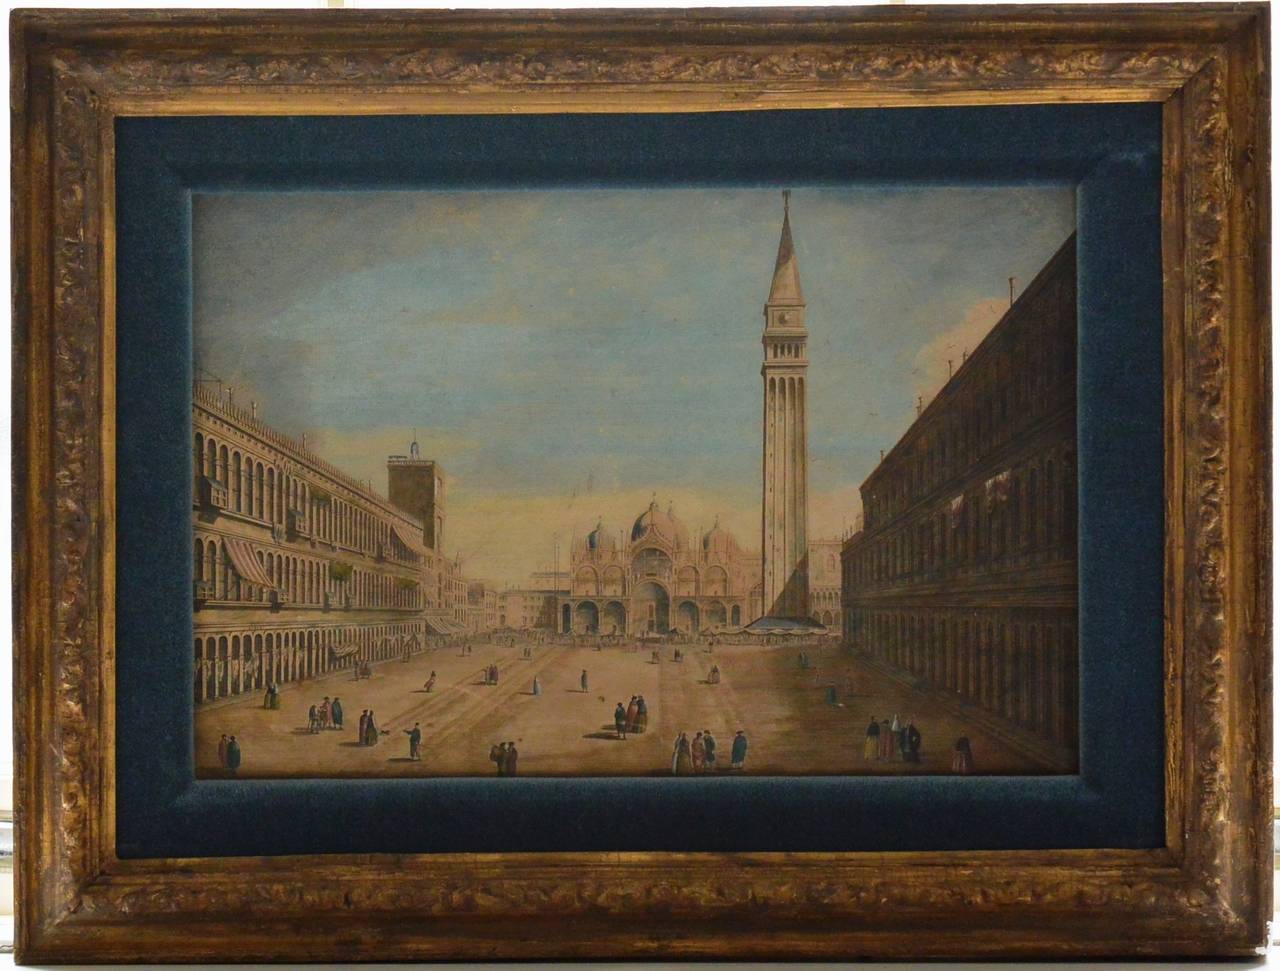 Pair of hand-colored Venetian engravings after Canaletto, 18th century hand-colored Venetian engravings in period gilt frames after Canaletto (1697-1768) with view of the Grand Canal towards the Custom Point from Campo San Vio and Piazza St. Marco